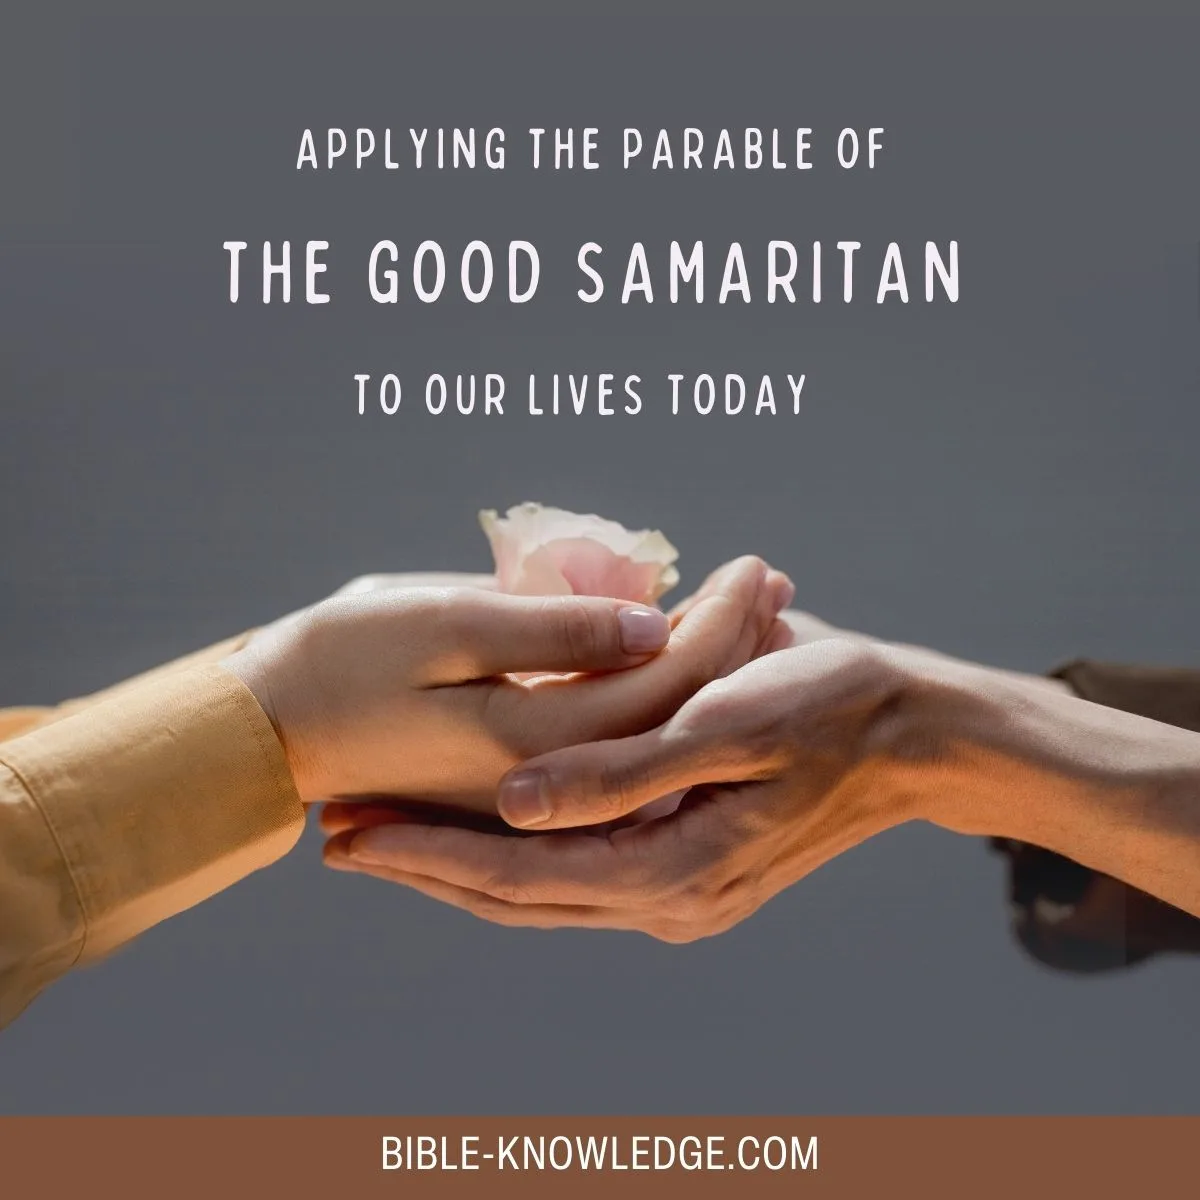 Applying the Parable of the Good Samaritan to Our Lives Today